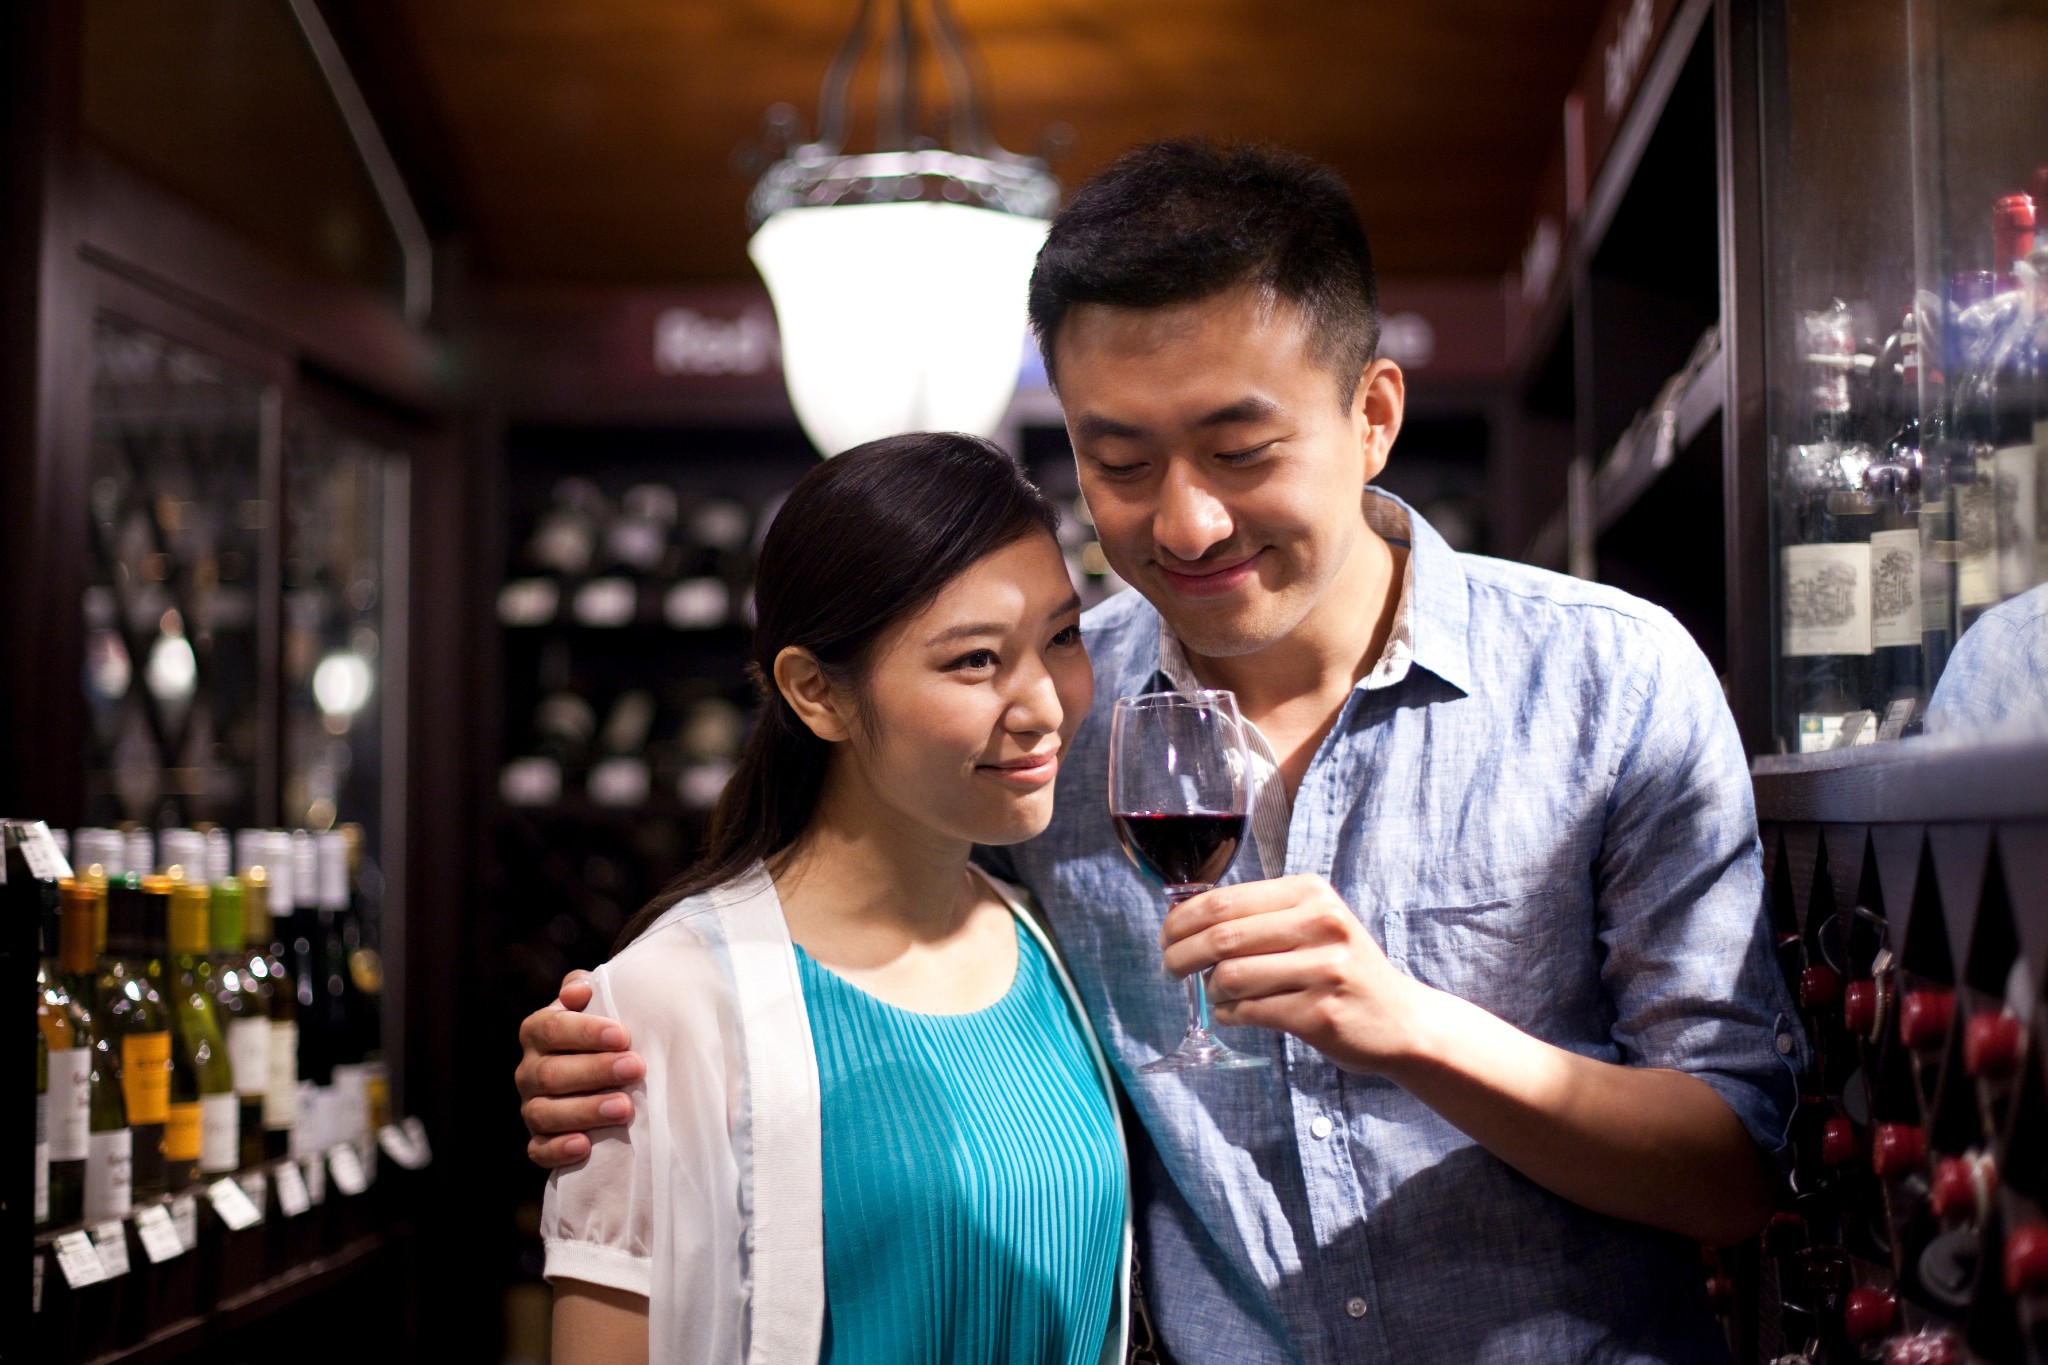 China’s Wine Imports Down 7% in 2021